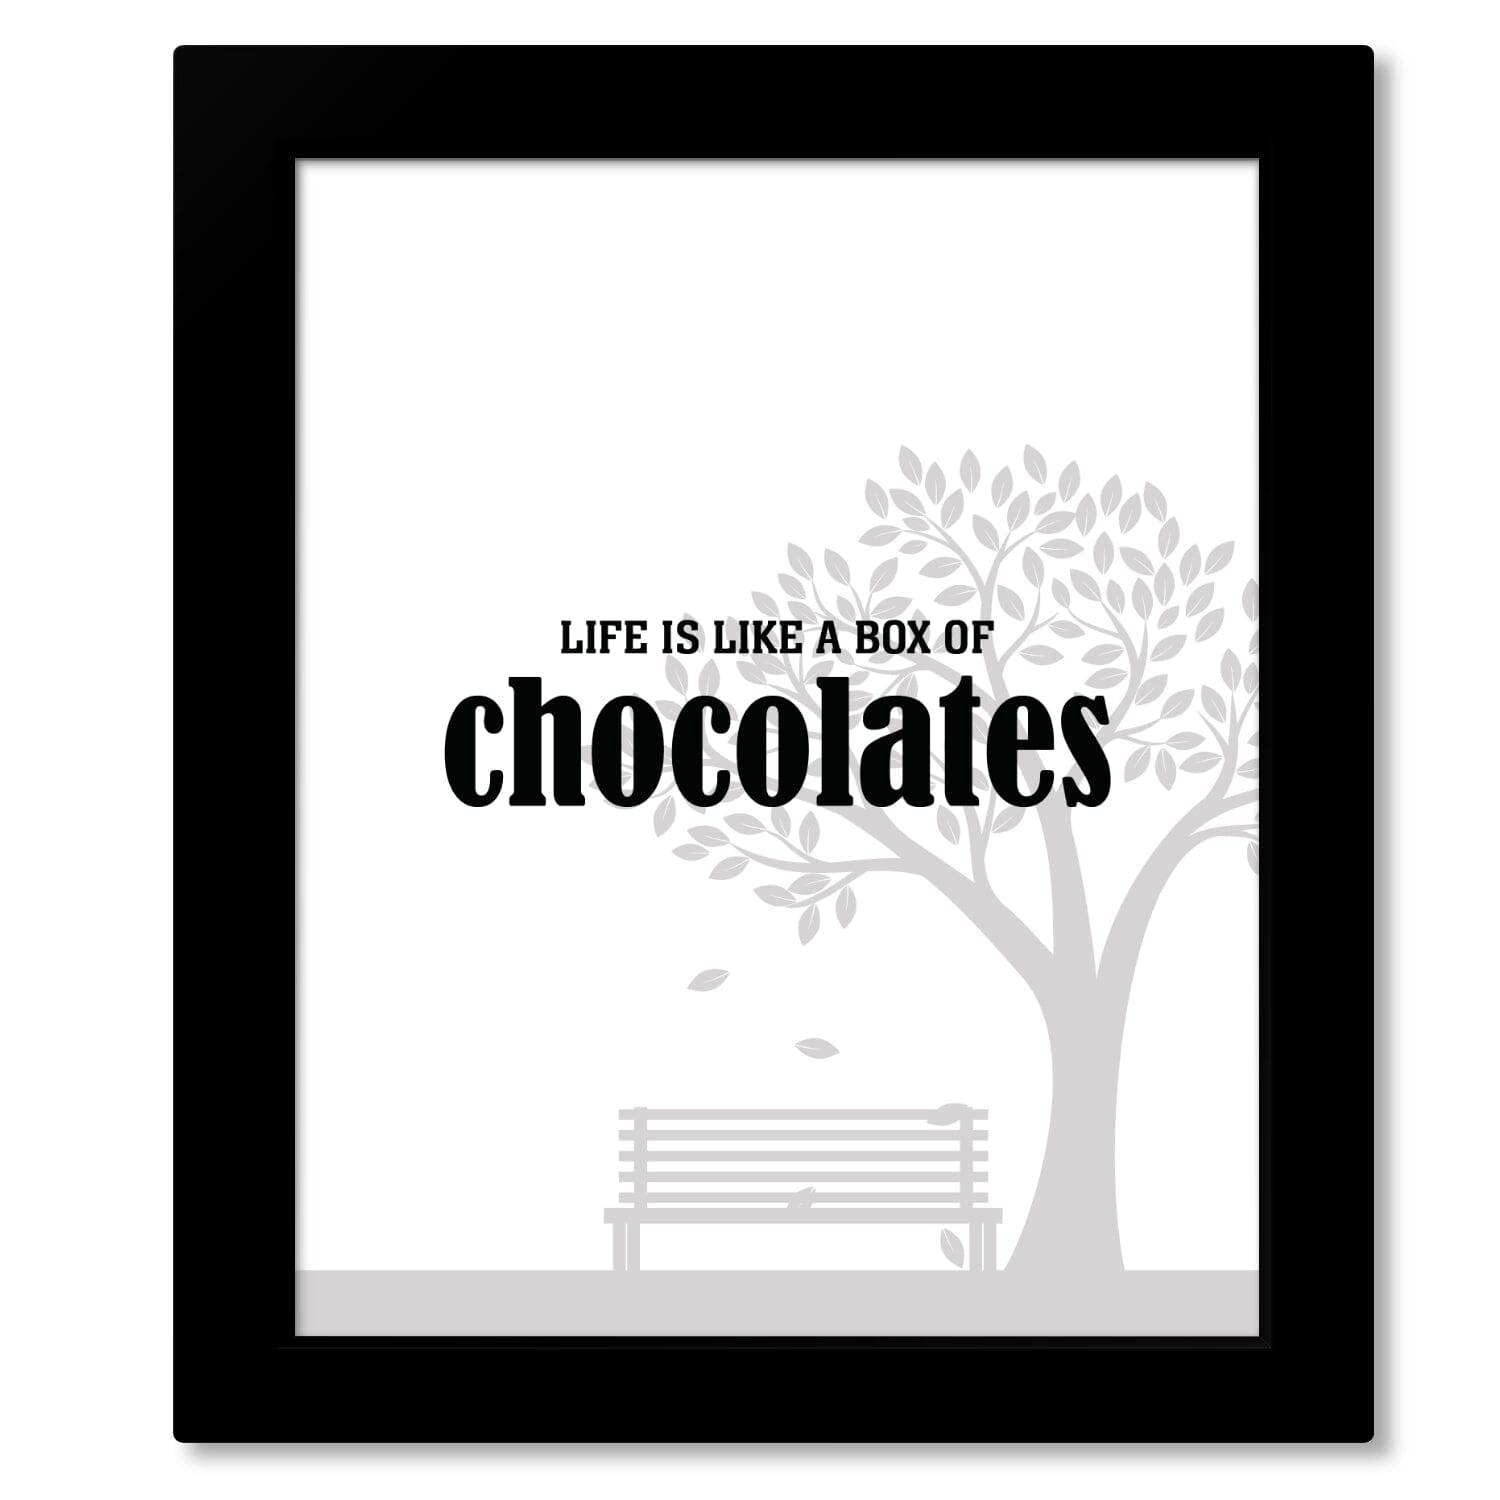 Life is Like a Box of Chocolates - Wise and Witty Quote Art Wise and Wiseass Quotes Song Lyrics Art 8x10 Framed Print 